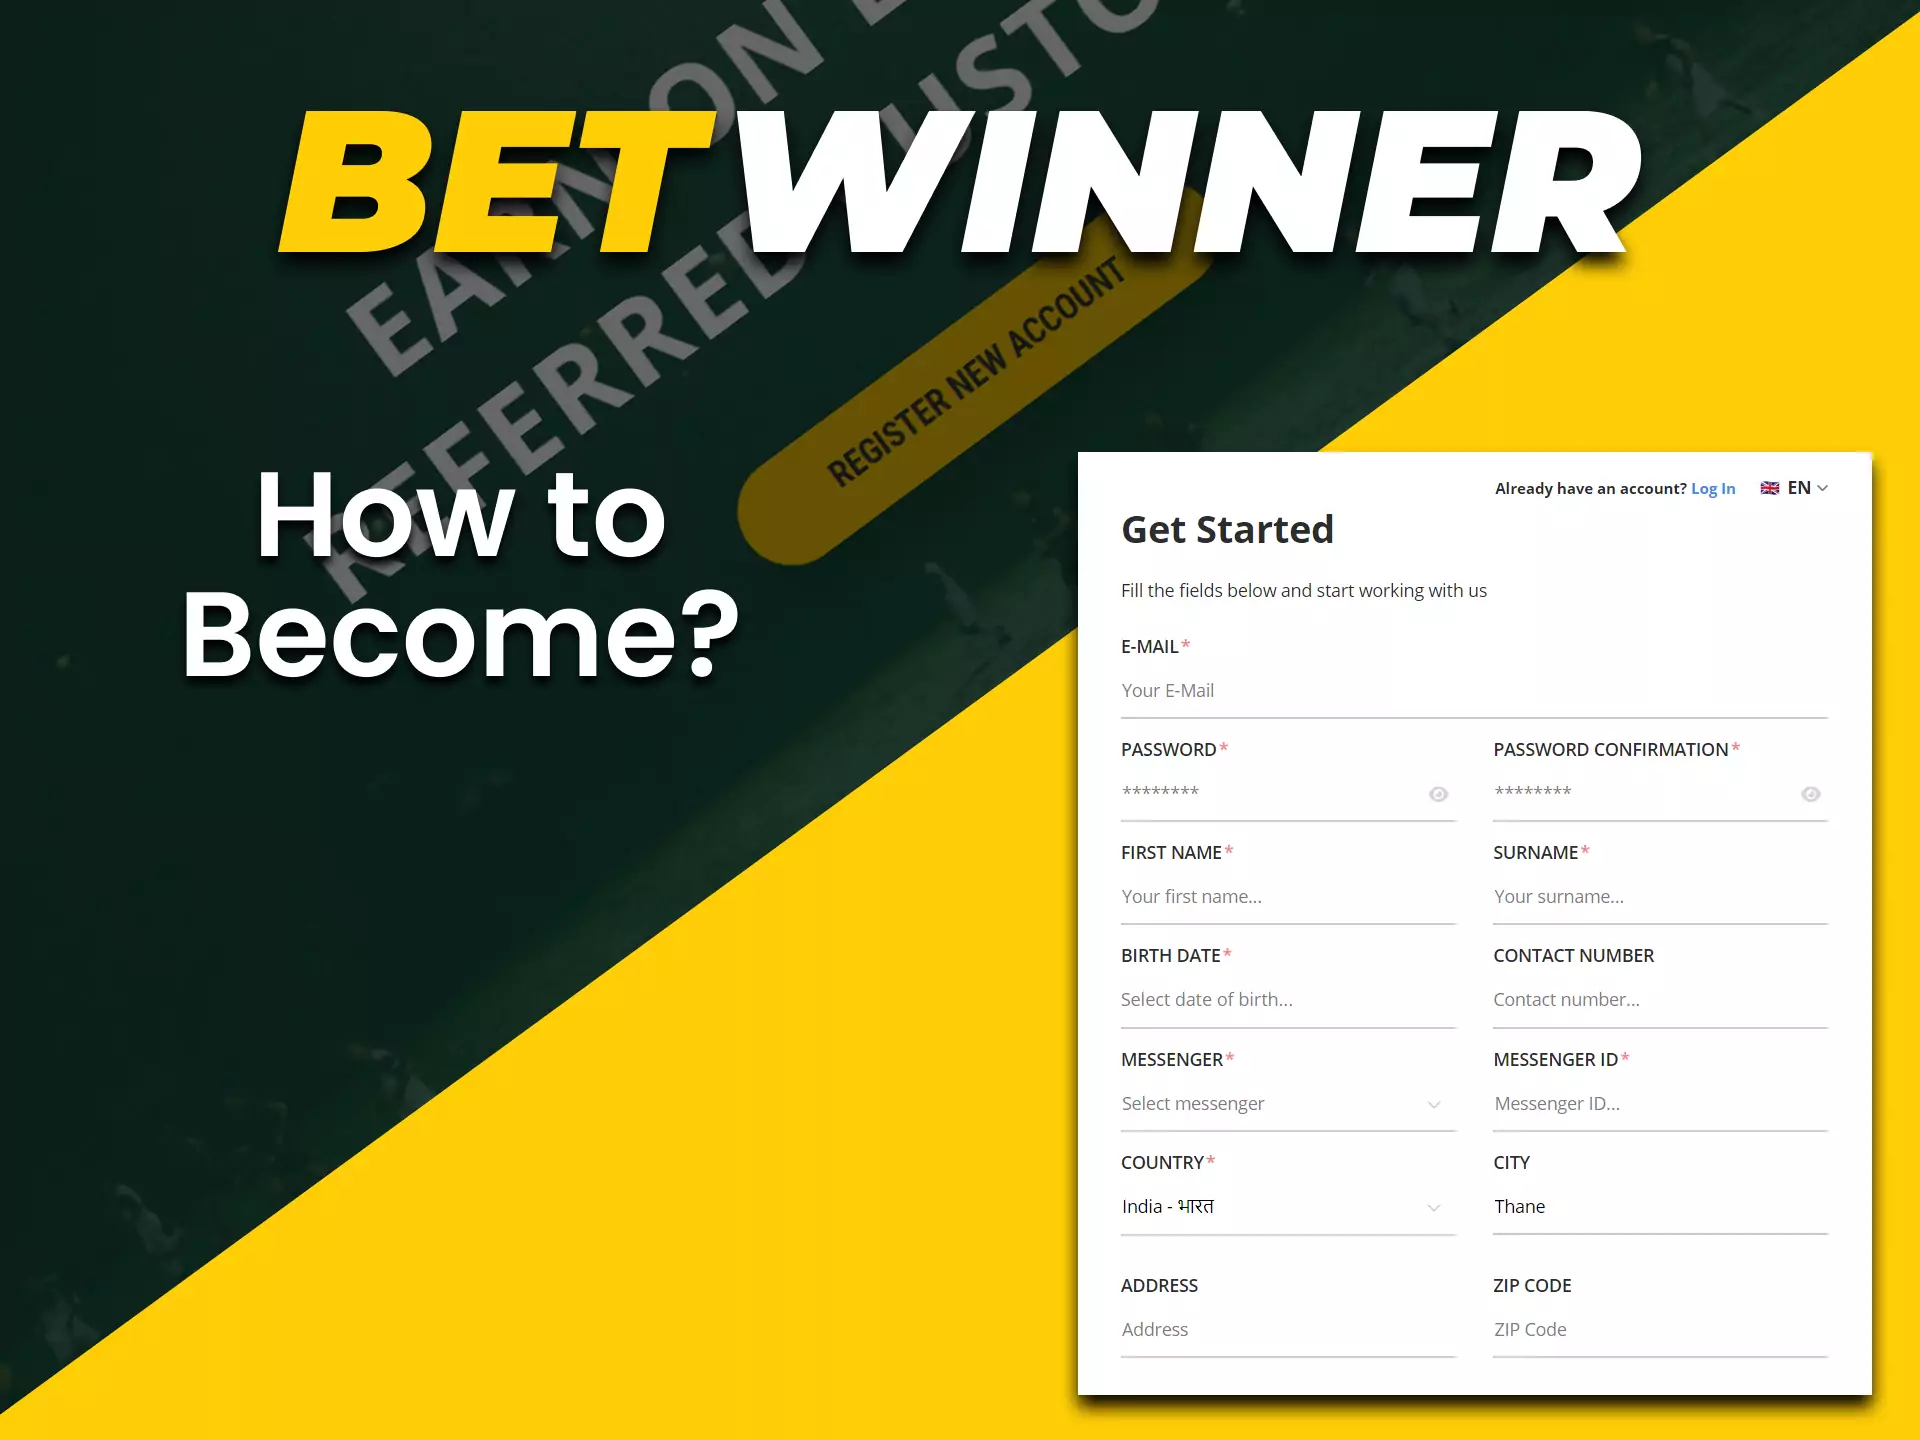 You can join the Betwinner club and become an affiliate.